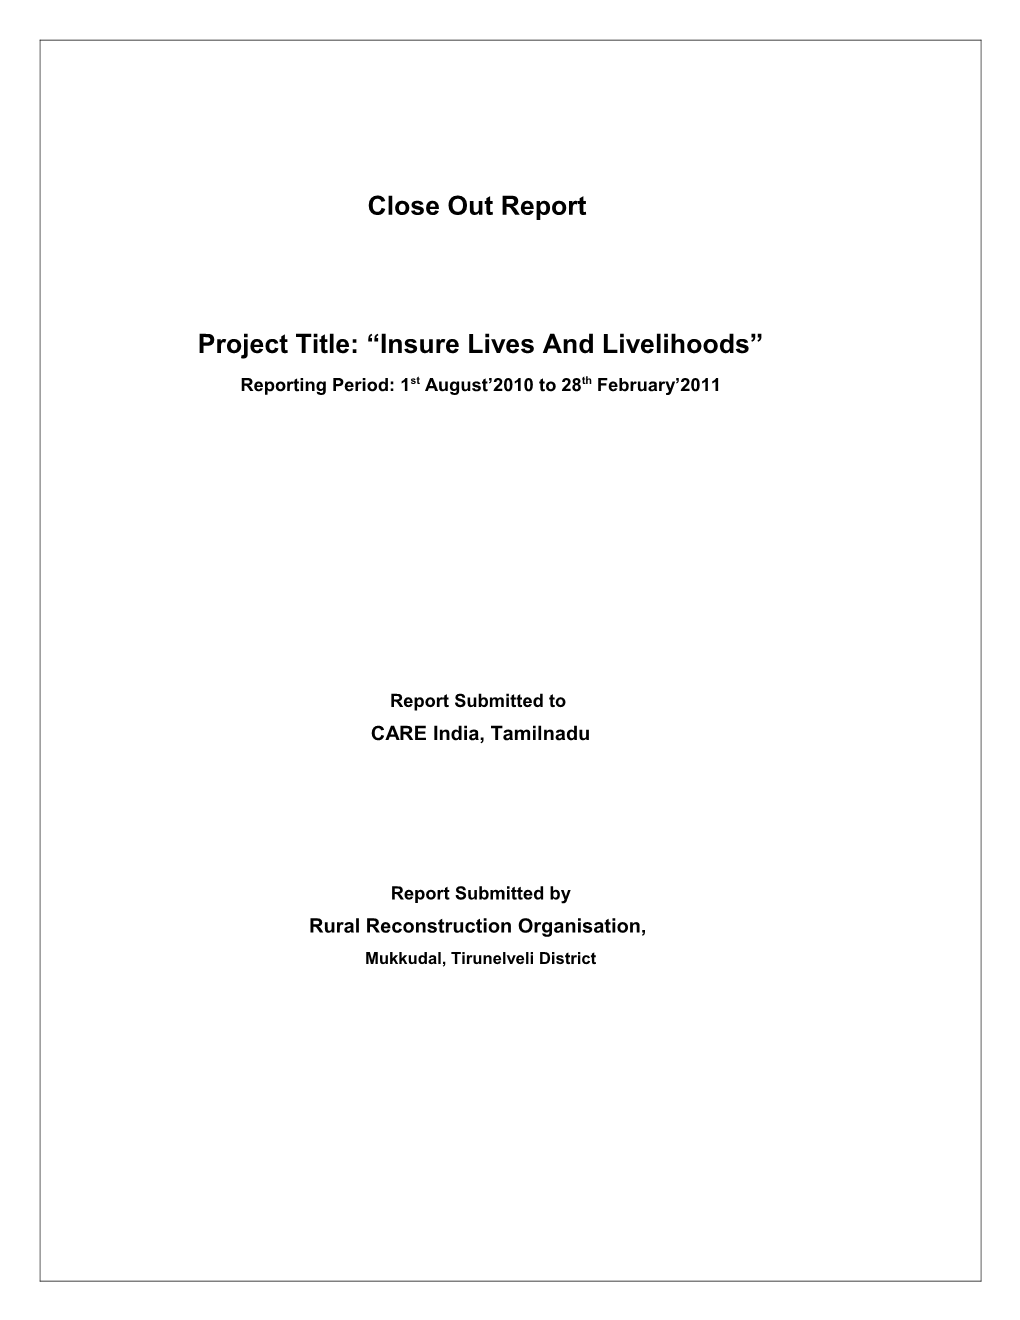 Project Title: Insure Lives and Livelihoods